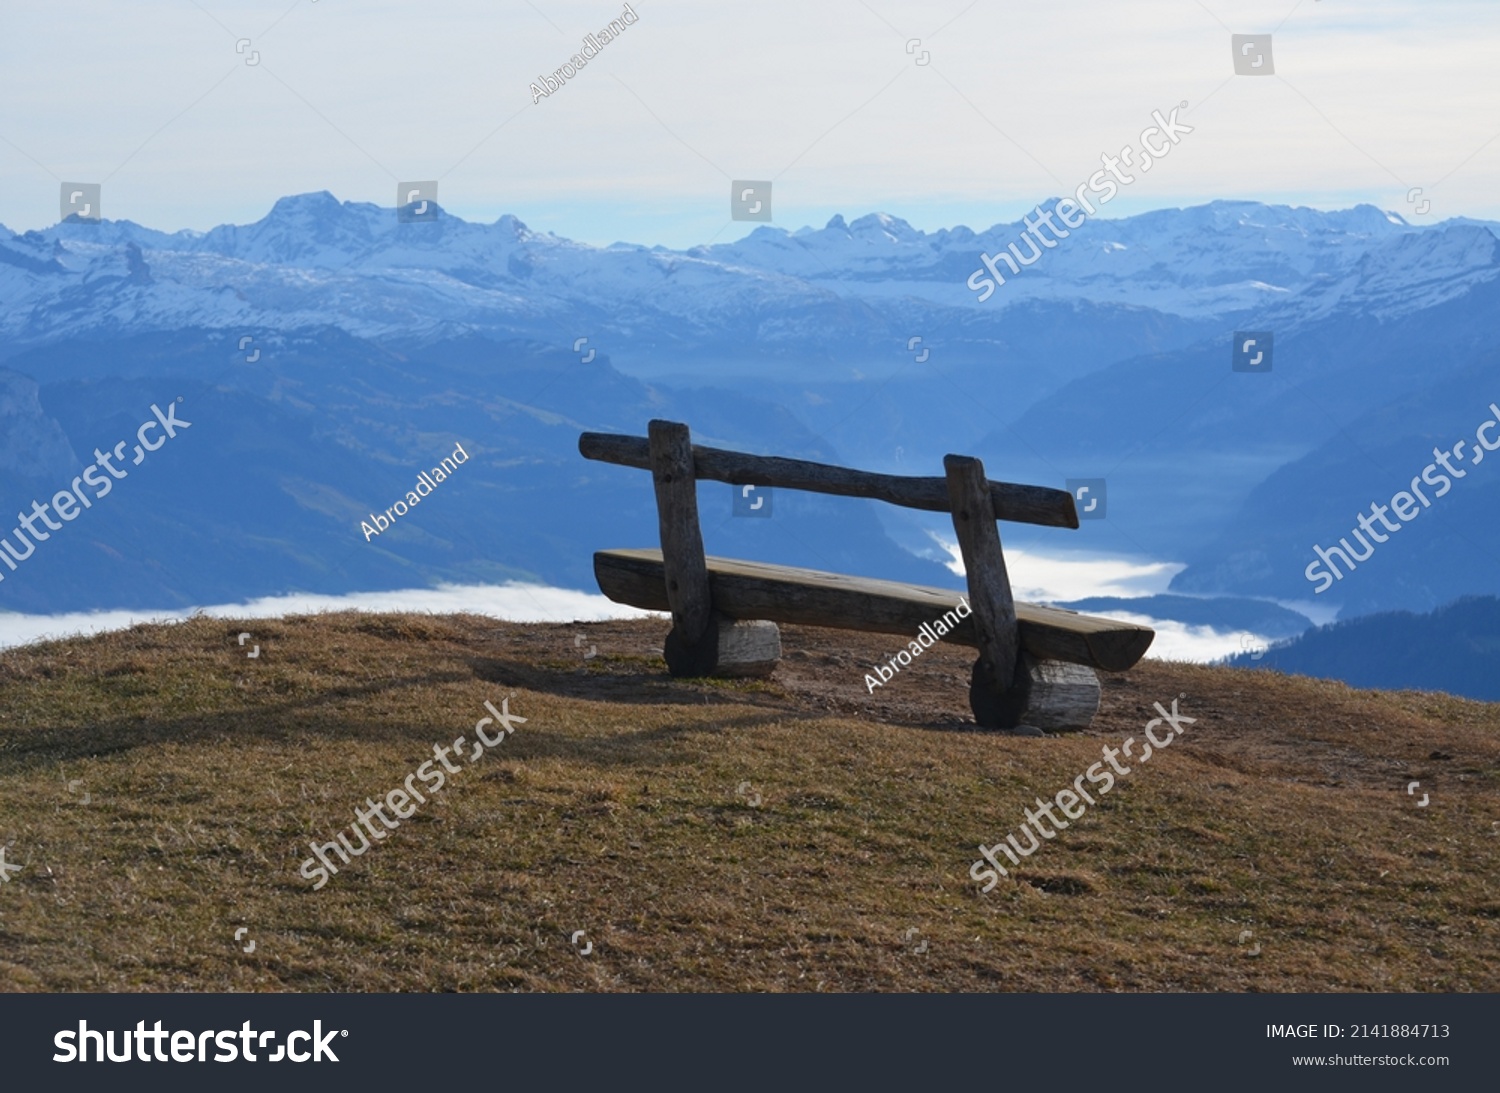 A bench on top of the mountain Rigi in Switzerland overlooking the skyline of mountaintops and lake in Switzerland #2141884713